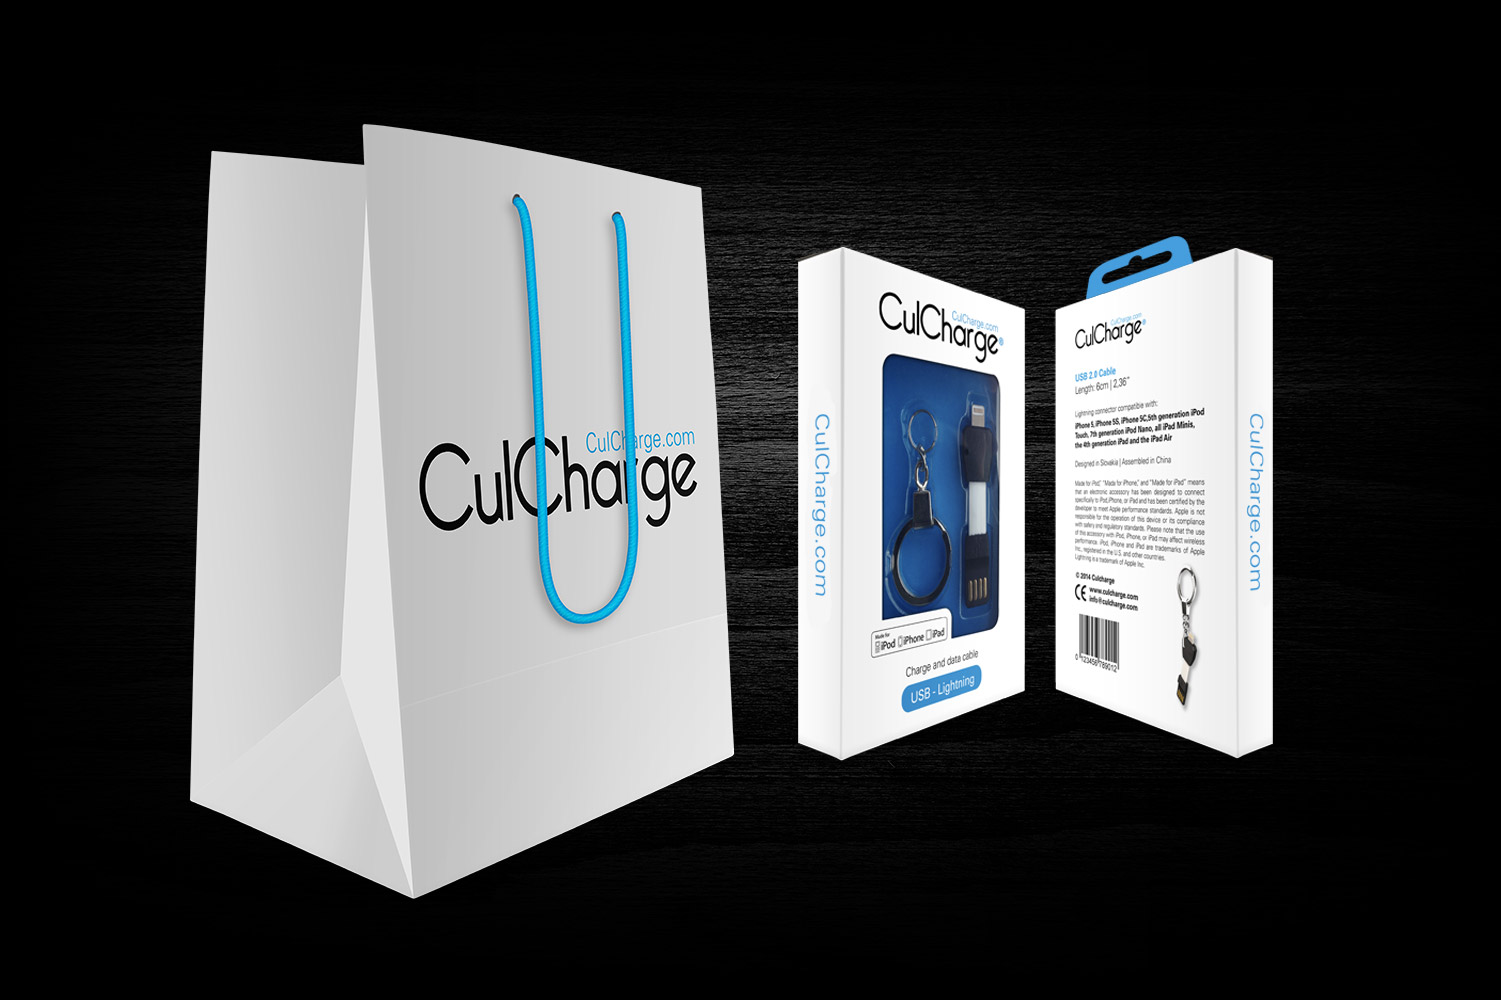 Culcharge packaging image